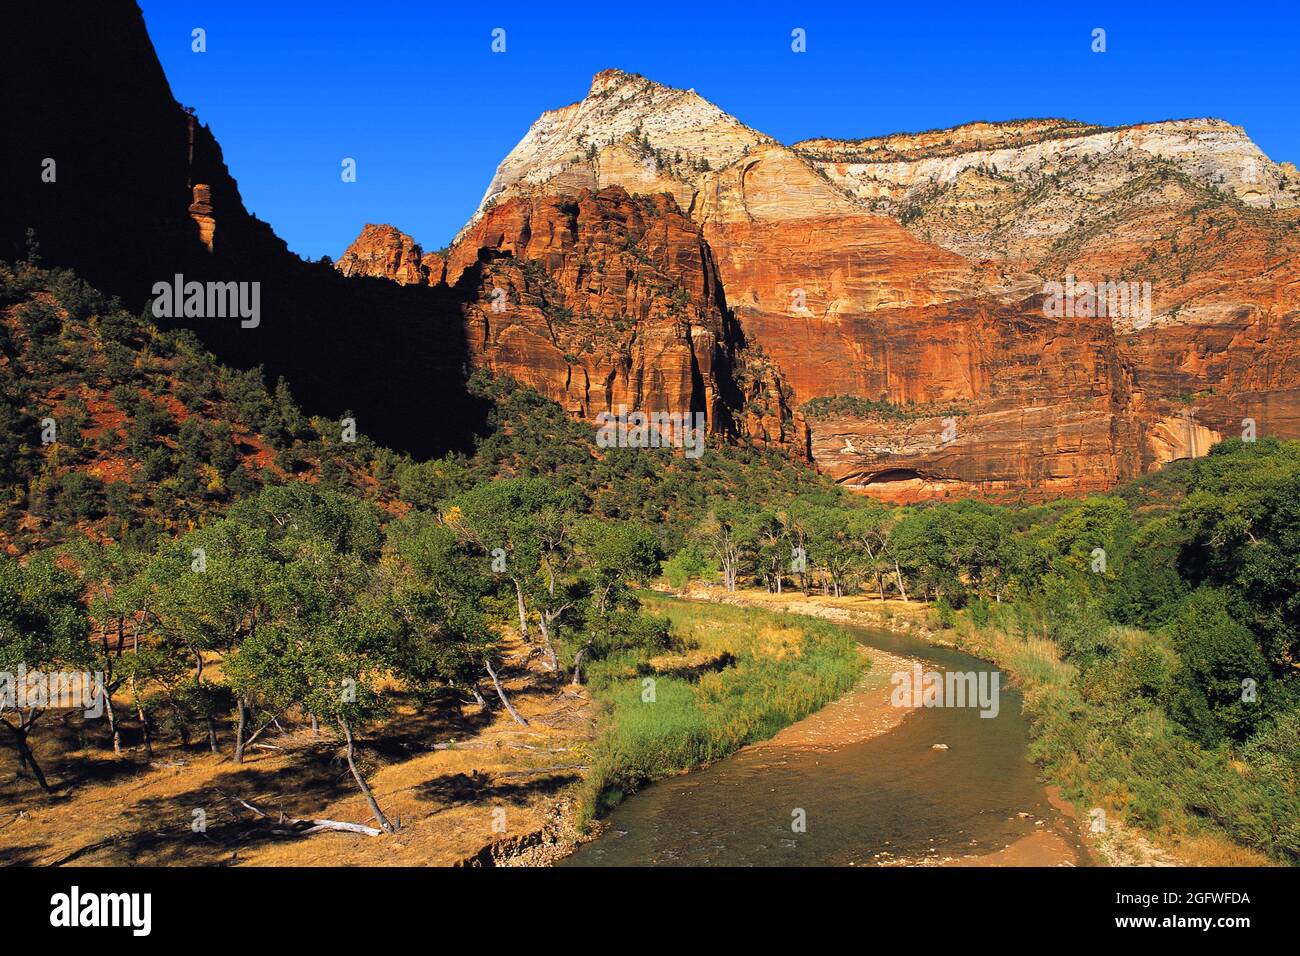 The rock peaks and woodlands Zion Canyon along the Virgin River, USA, Utah, Zion National Park Stock Photo